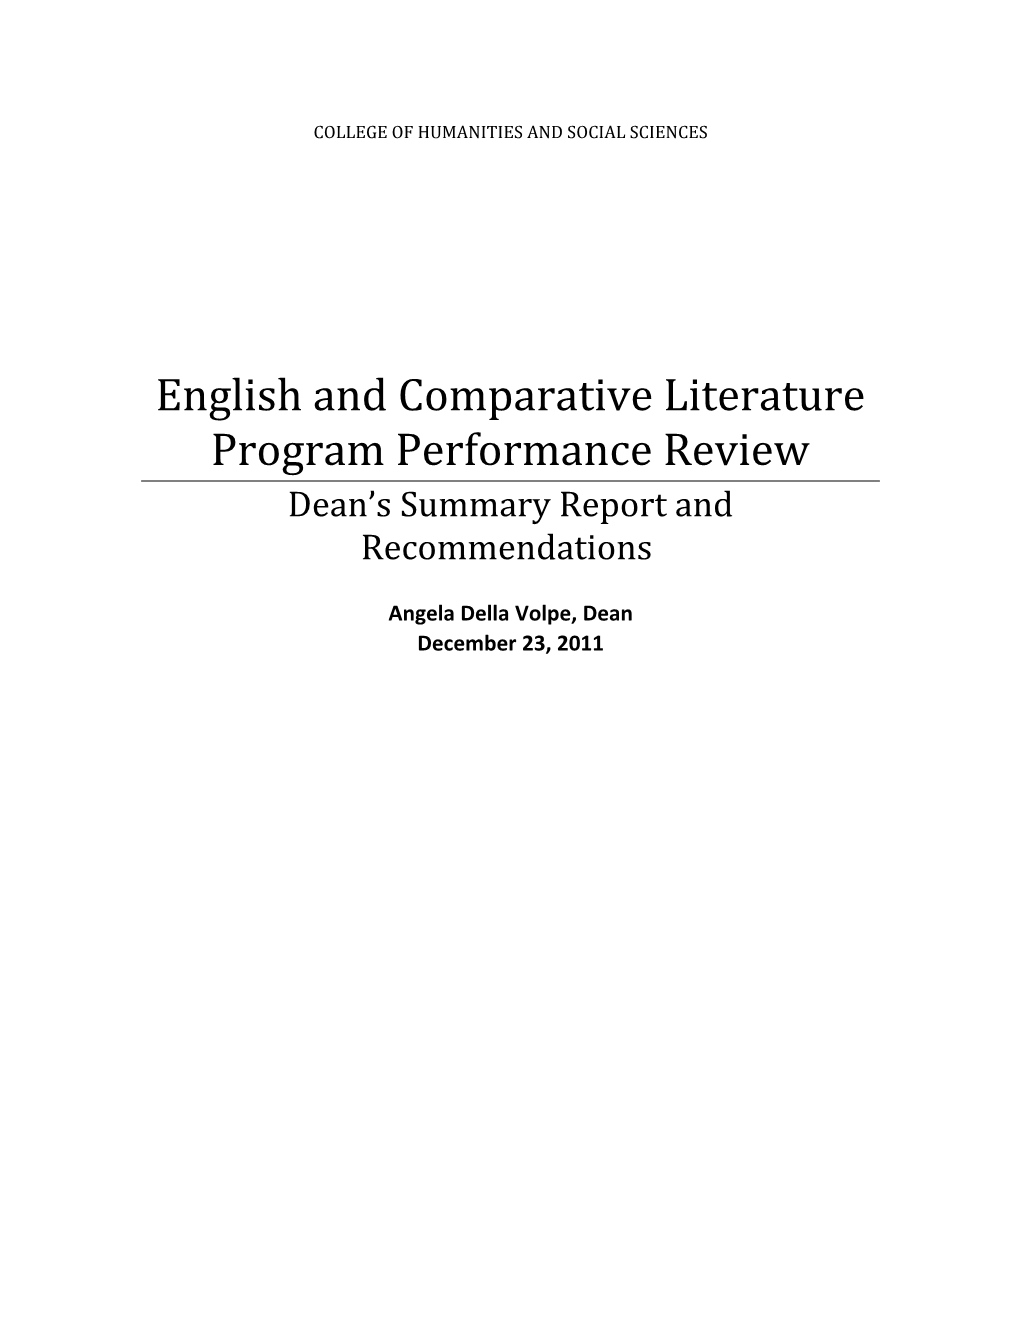 Afro-Ethnic Program Performance Review